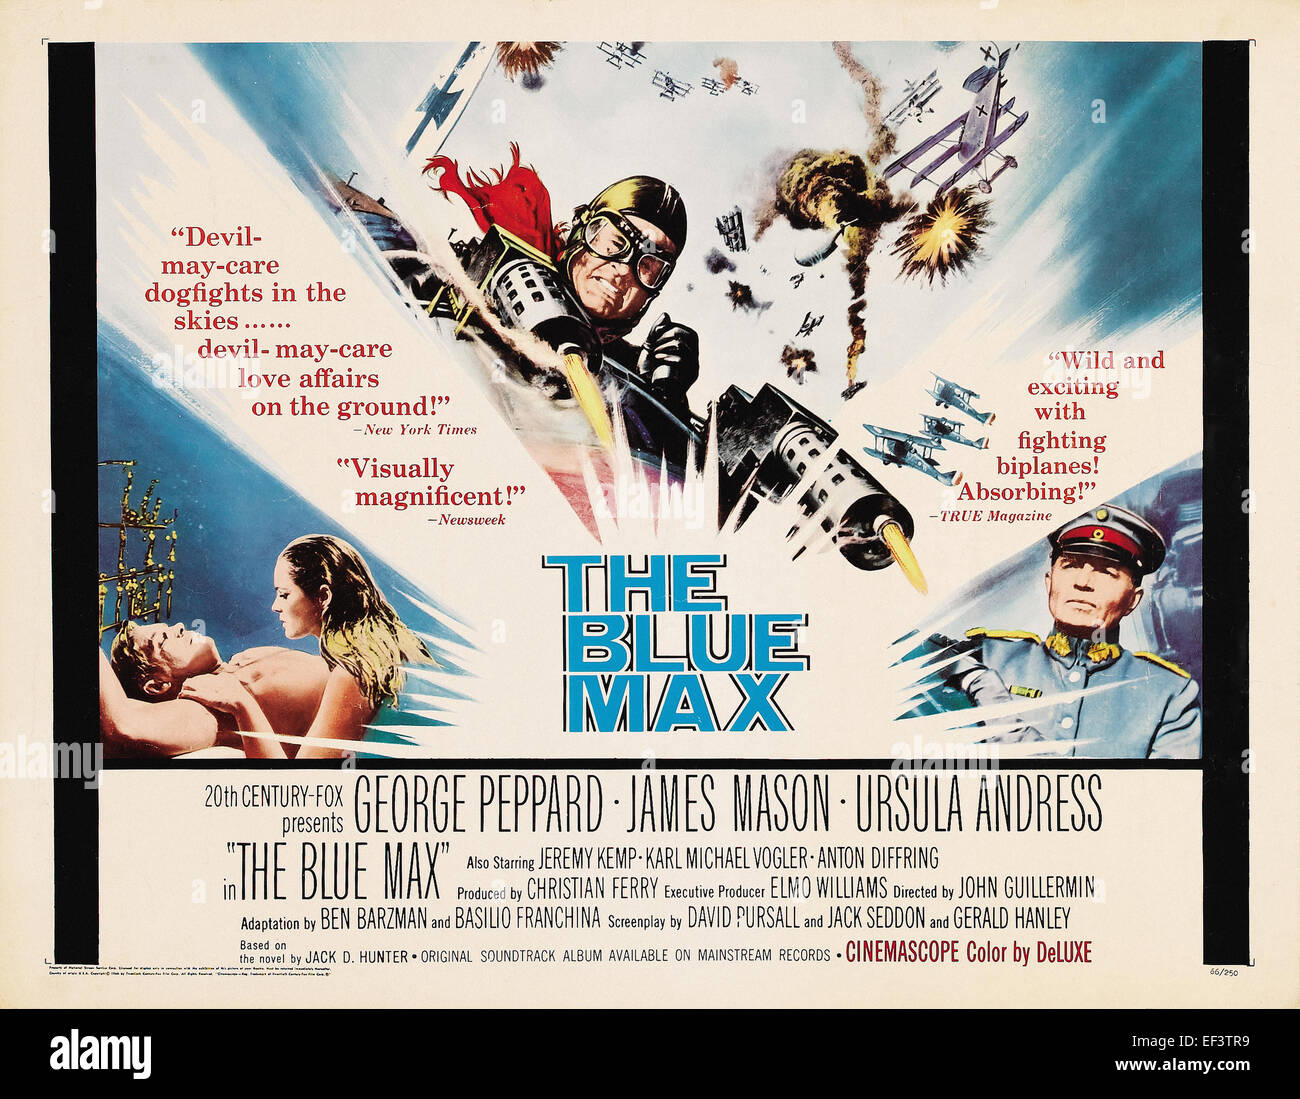 The Blue Max - Movie Poster Stock Photo